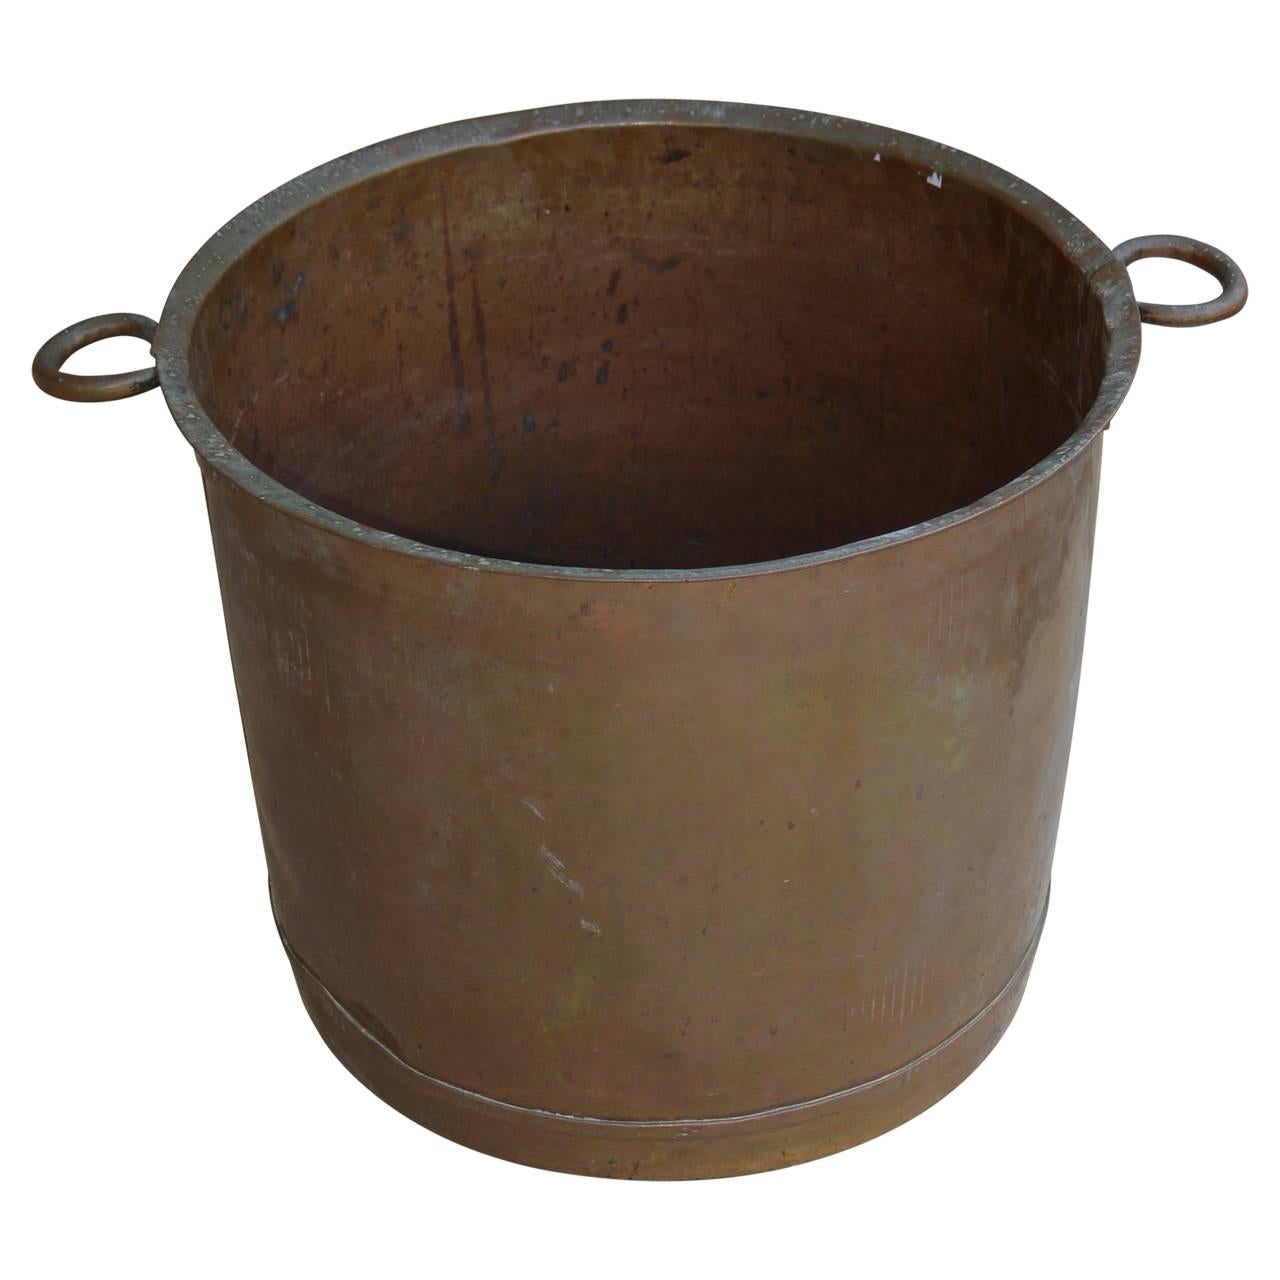 Large two handle copper cauldron, perfect for firewood.